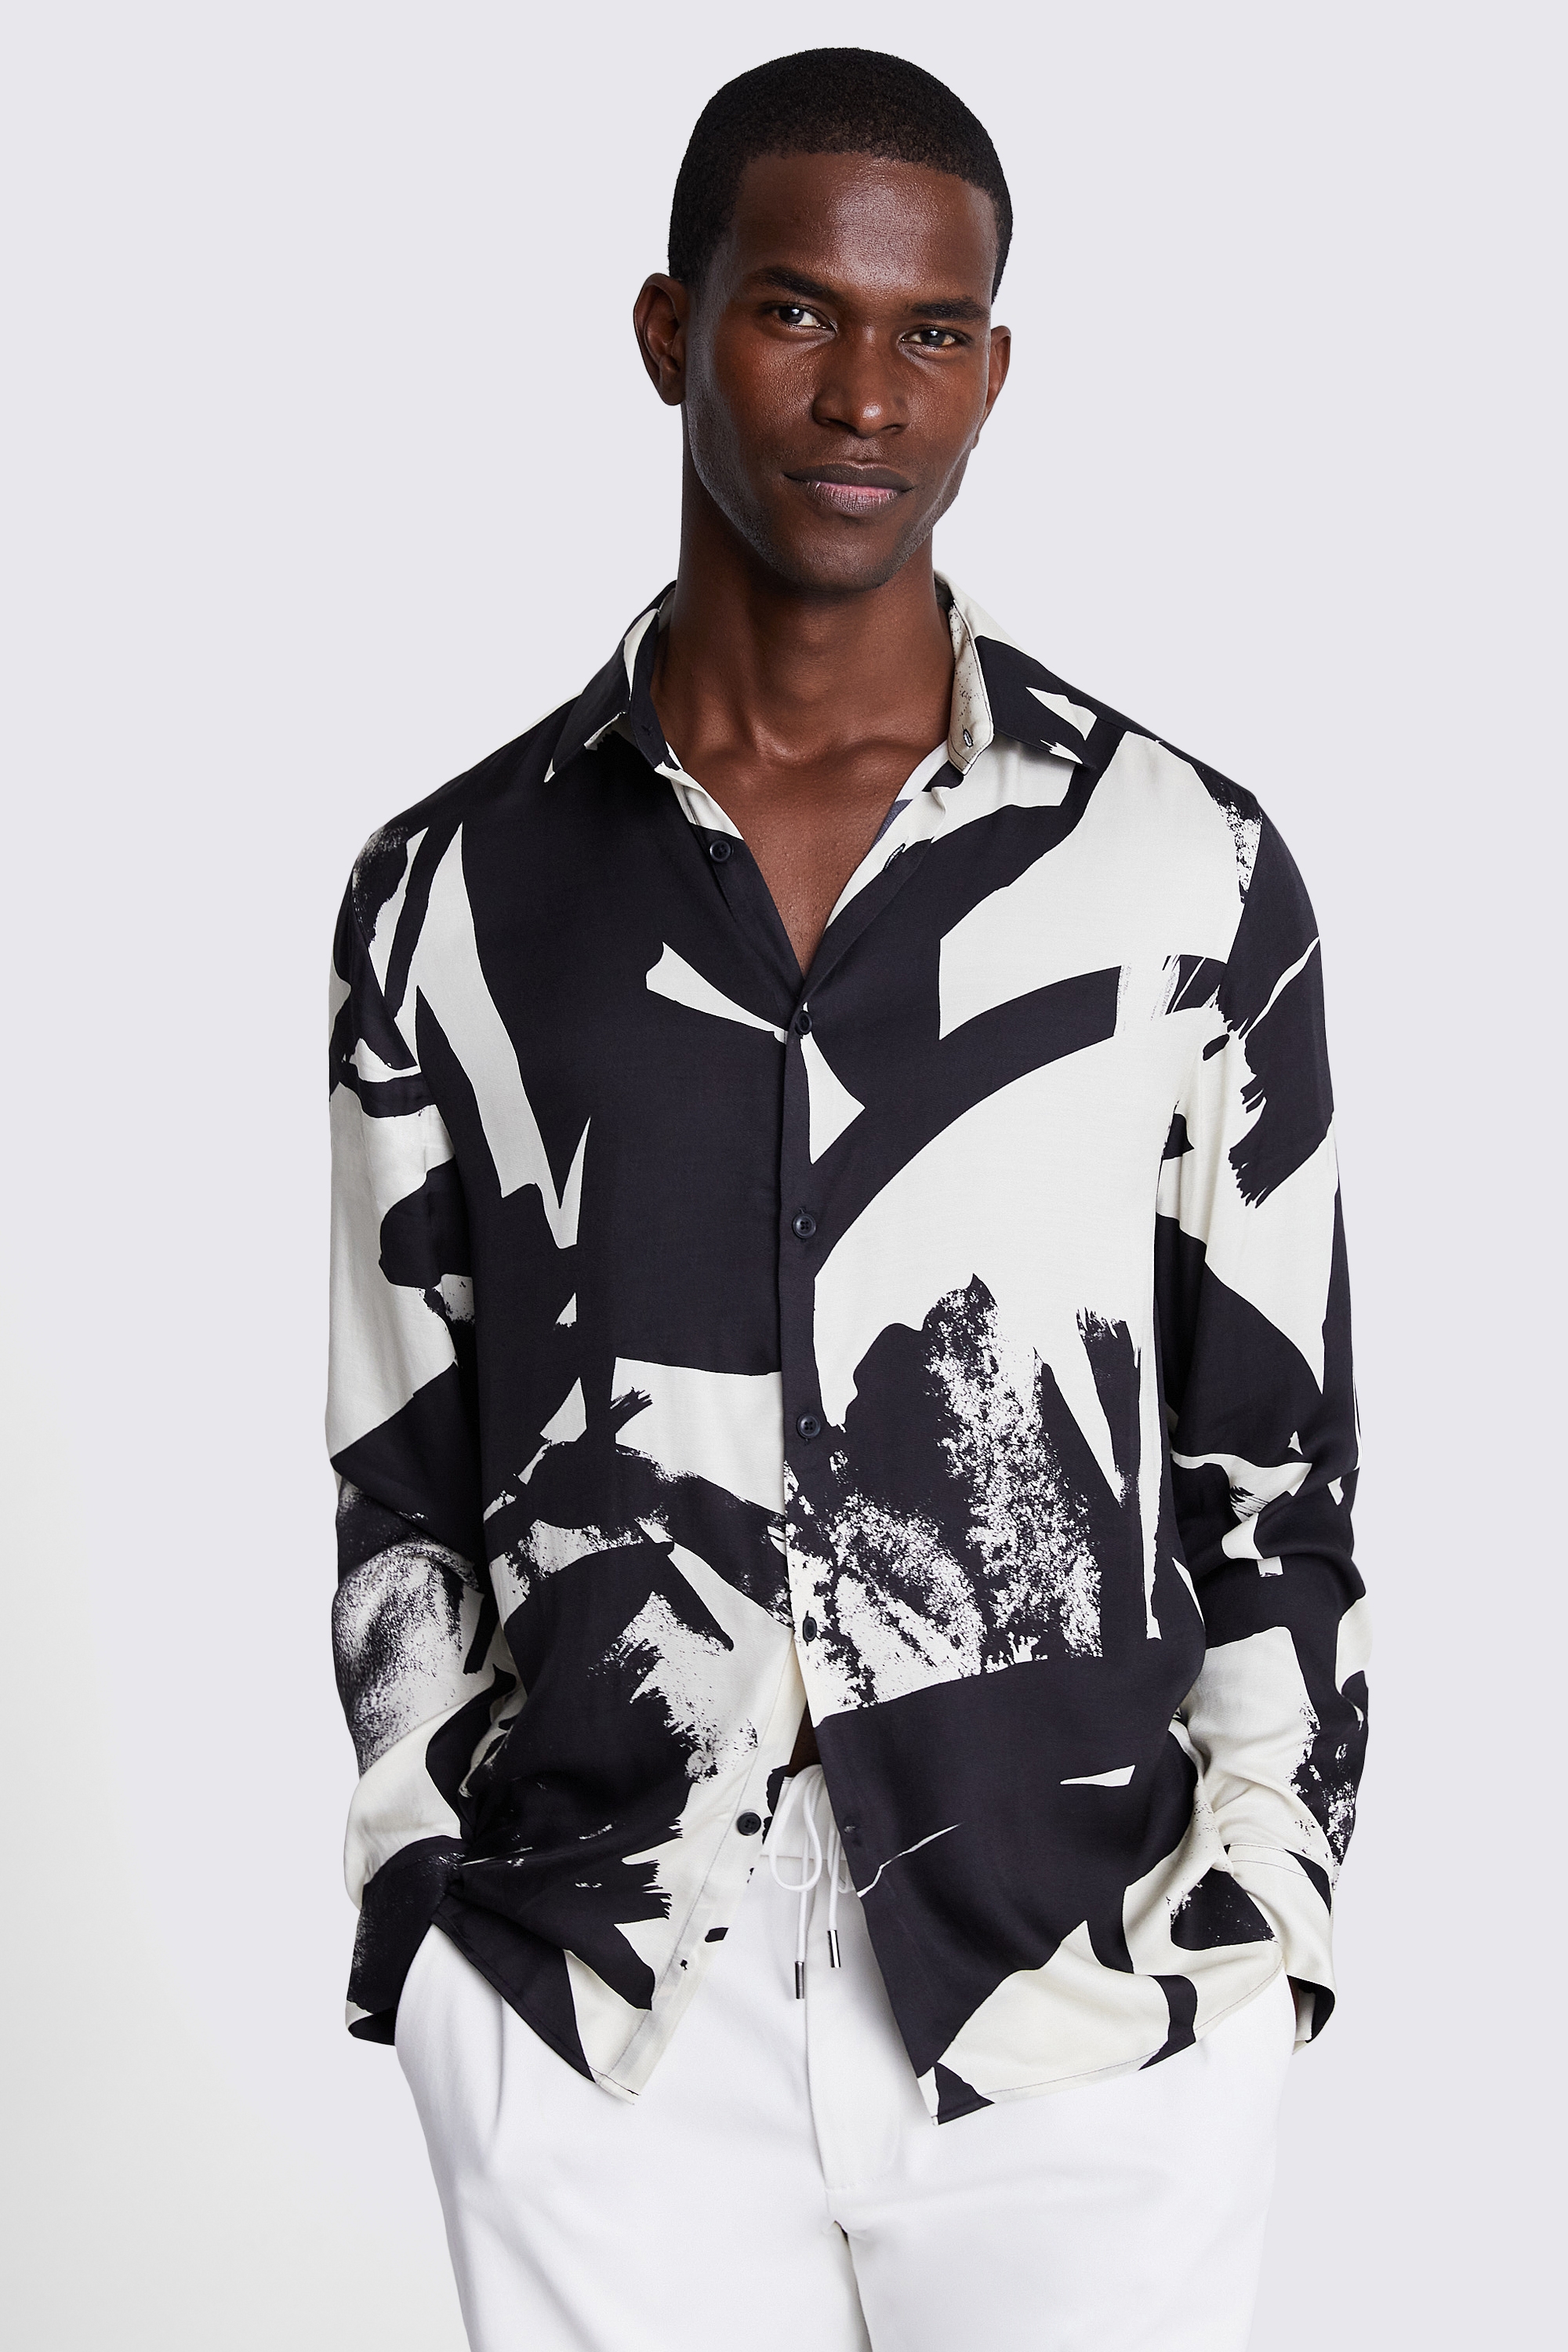 Off White and Black Abstract Printed Shirt | Buy Online at Moss